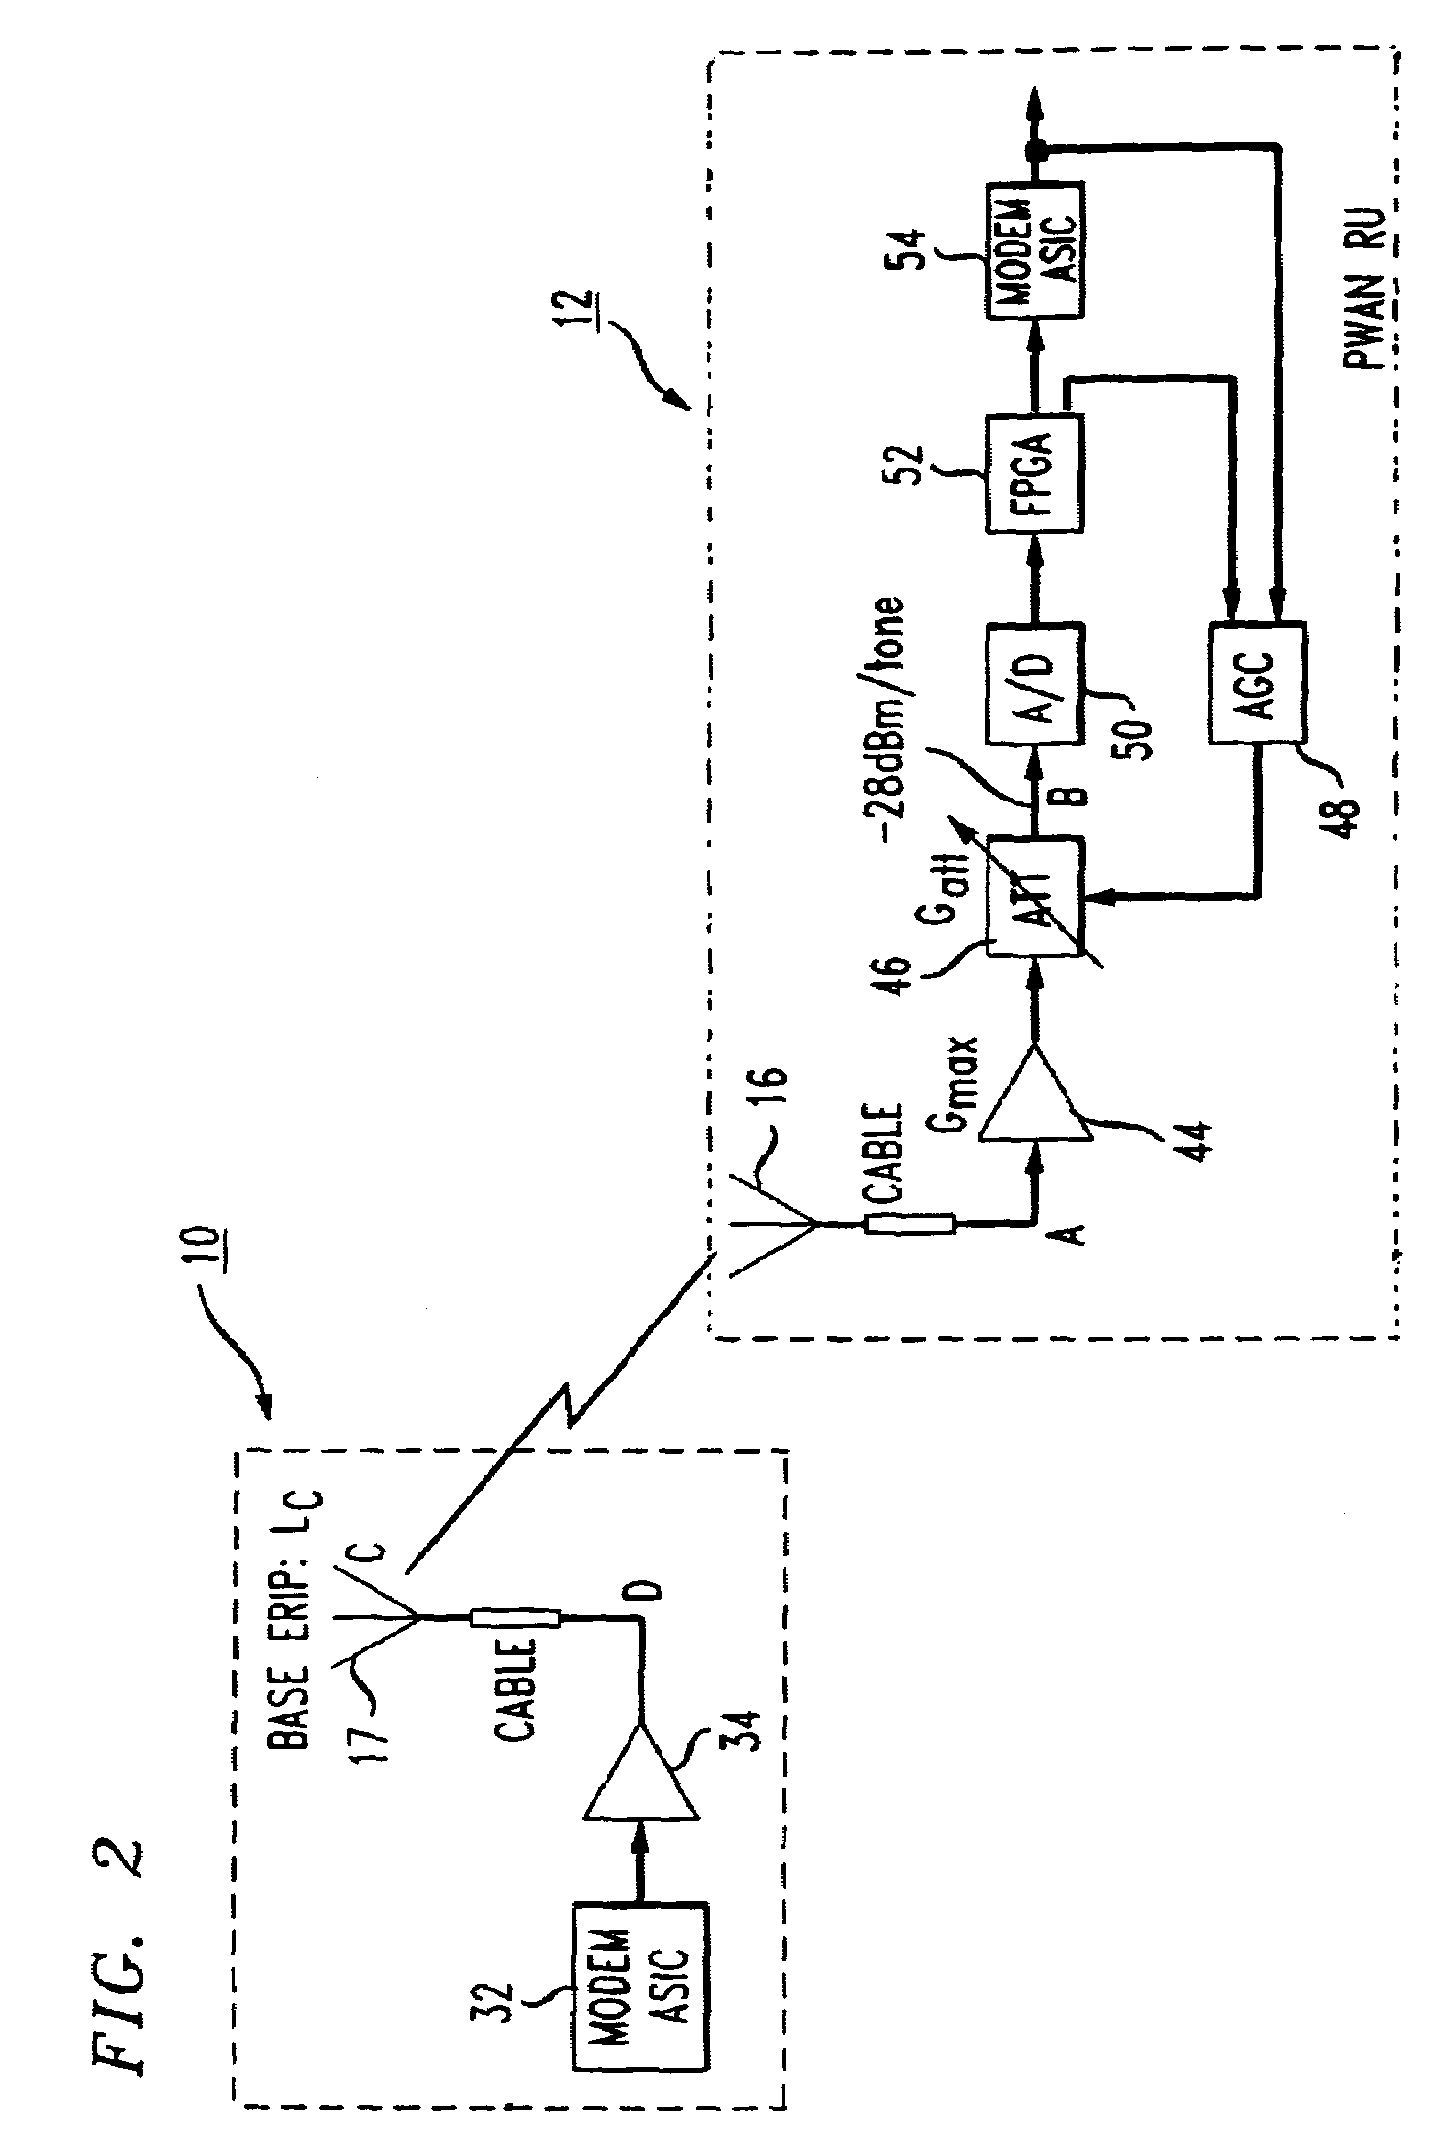 Transmit power control for an OFDM-based wireless communication system